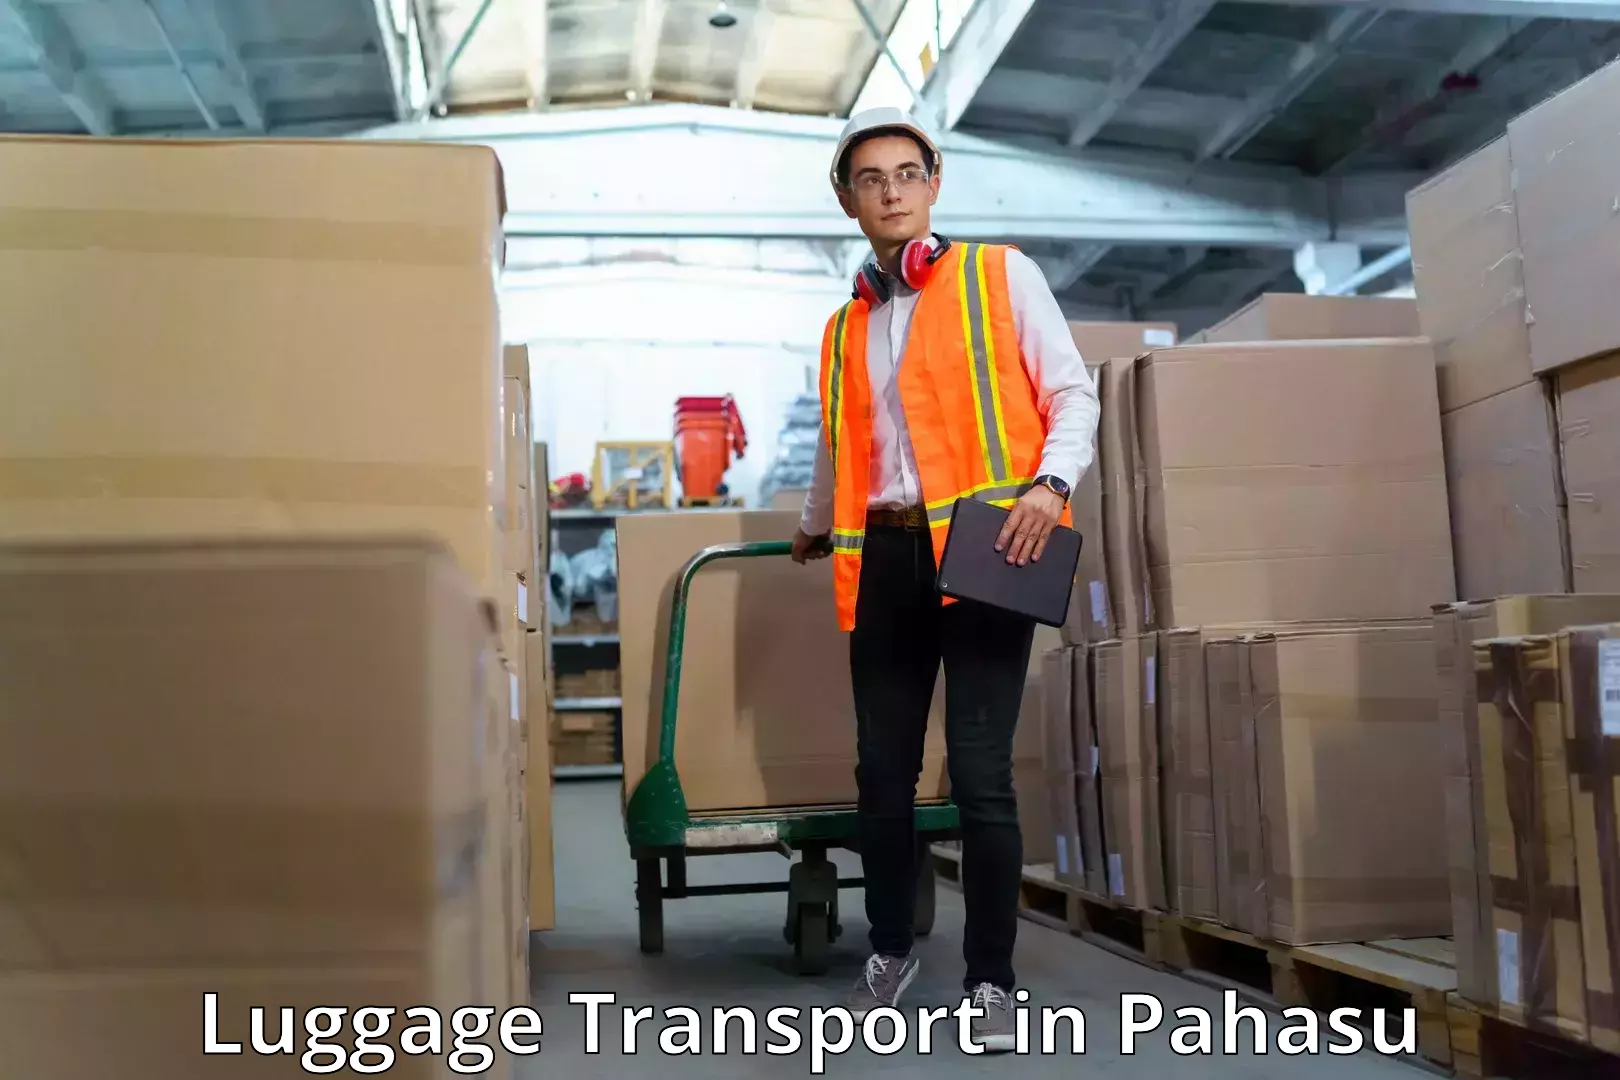 Luggage shipping consultation in Pahasu